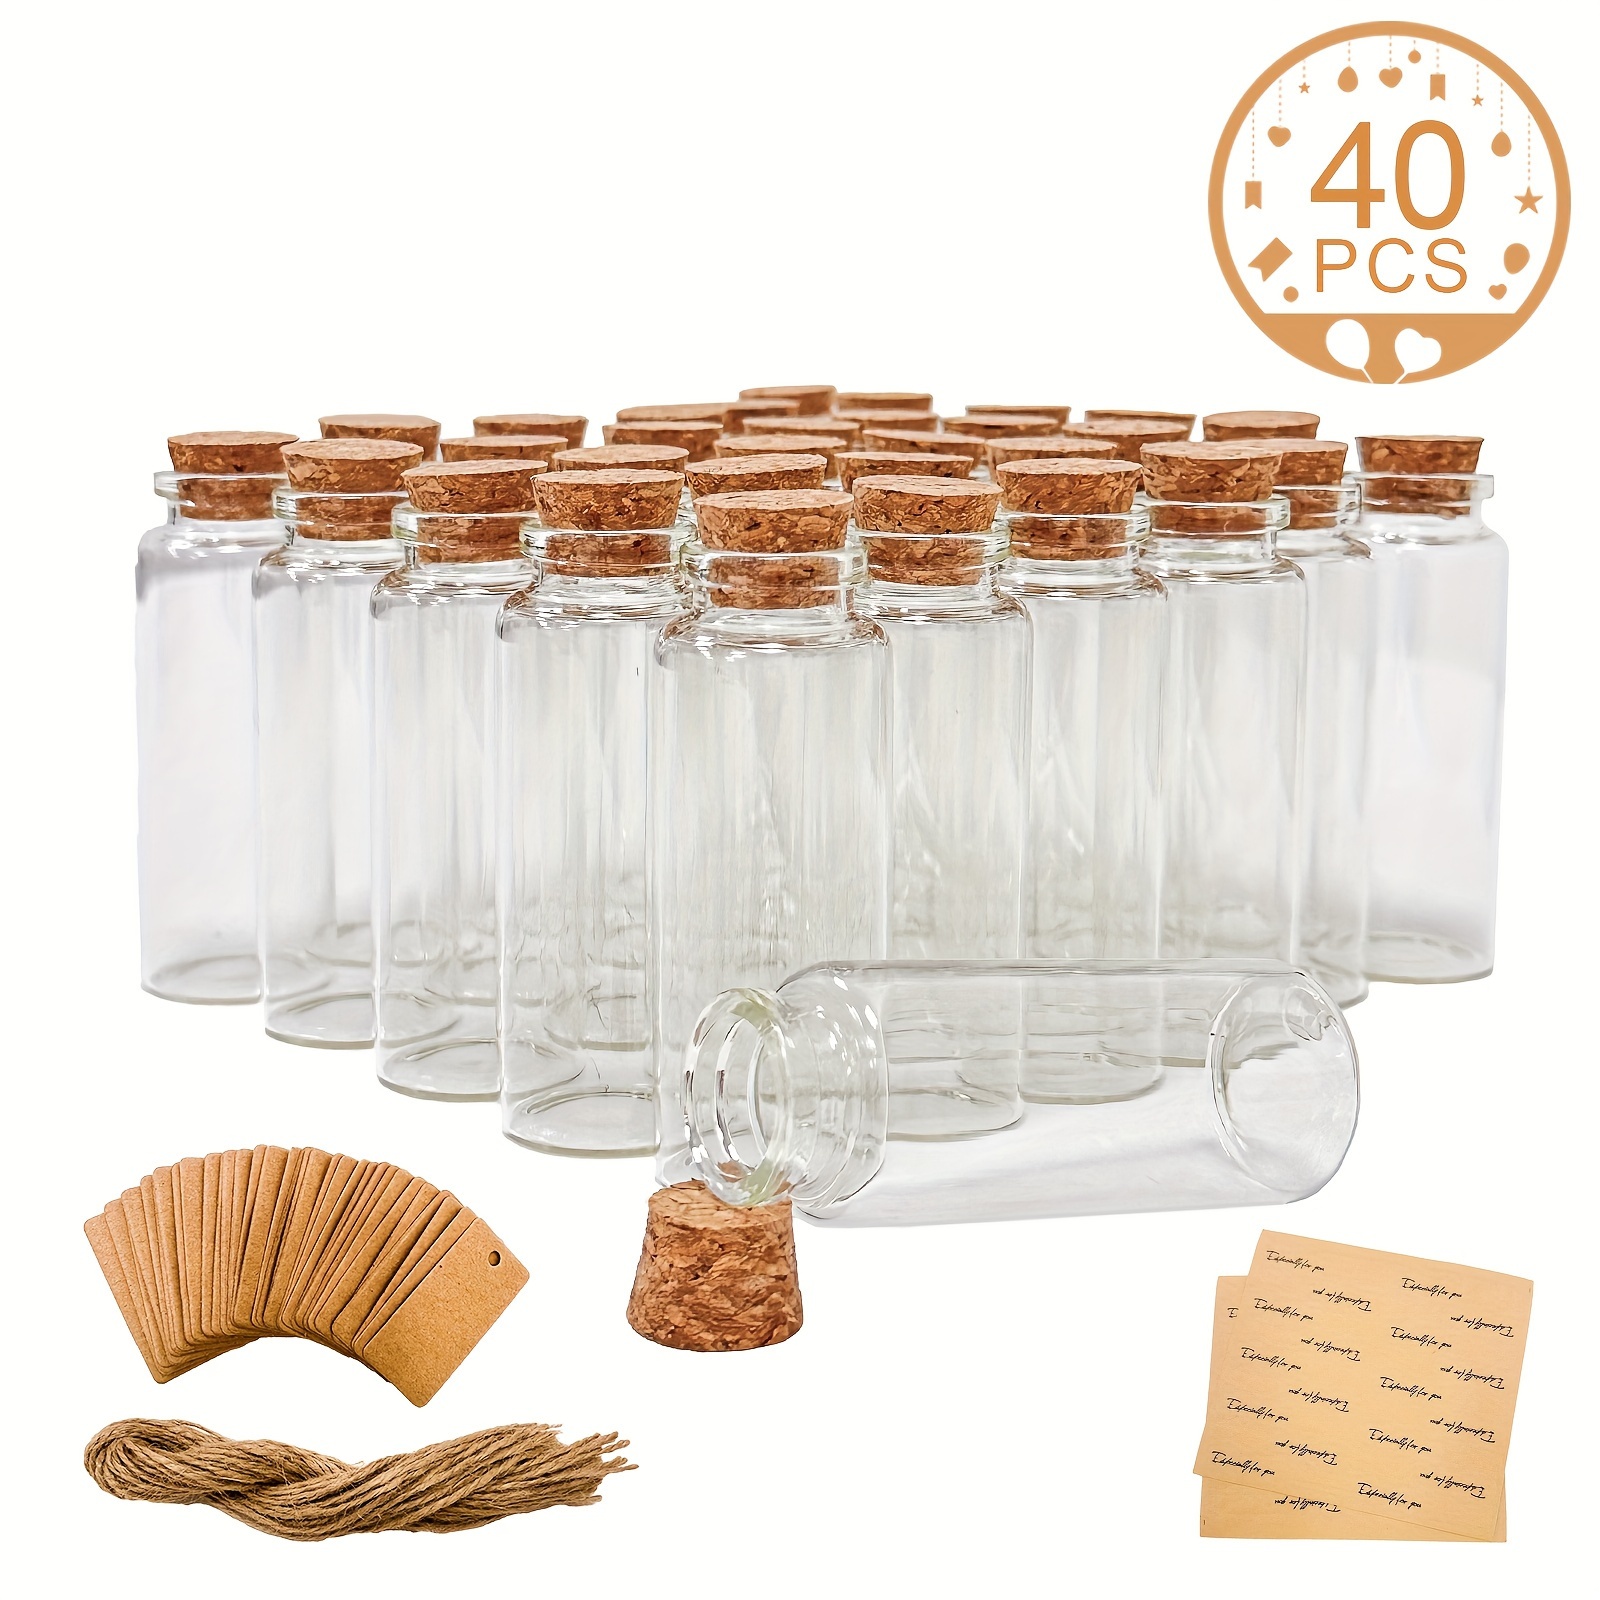 Clear Plastic Sand Art Bottles with Cork Stoppers, 2 Oz Cork Bottle,  Plastic Jars with Cork, Mini Vial Potion Bottles for DIY Arts & Crafts,  Party